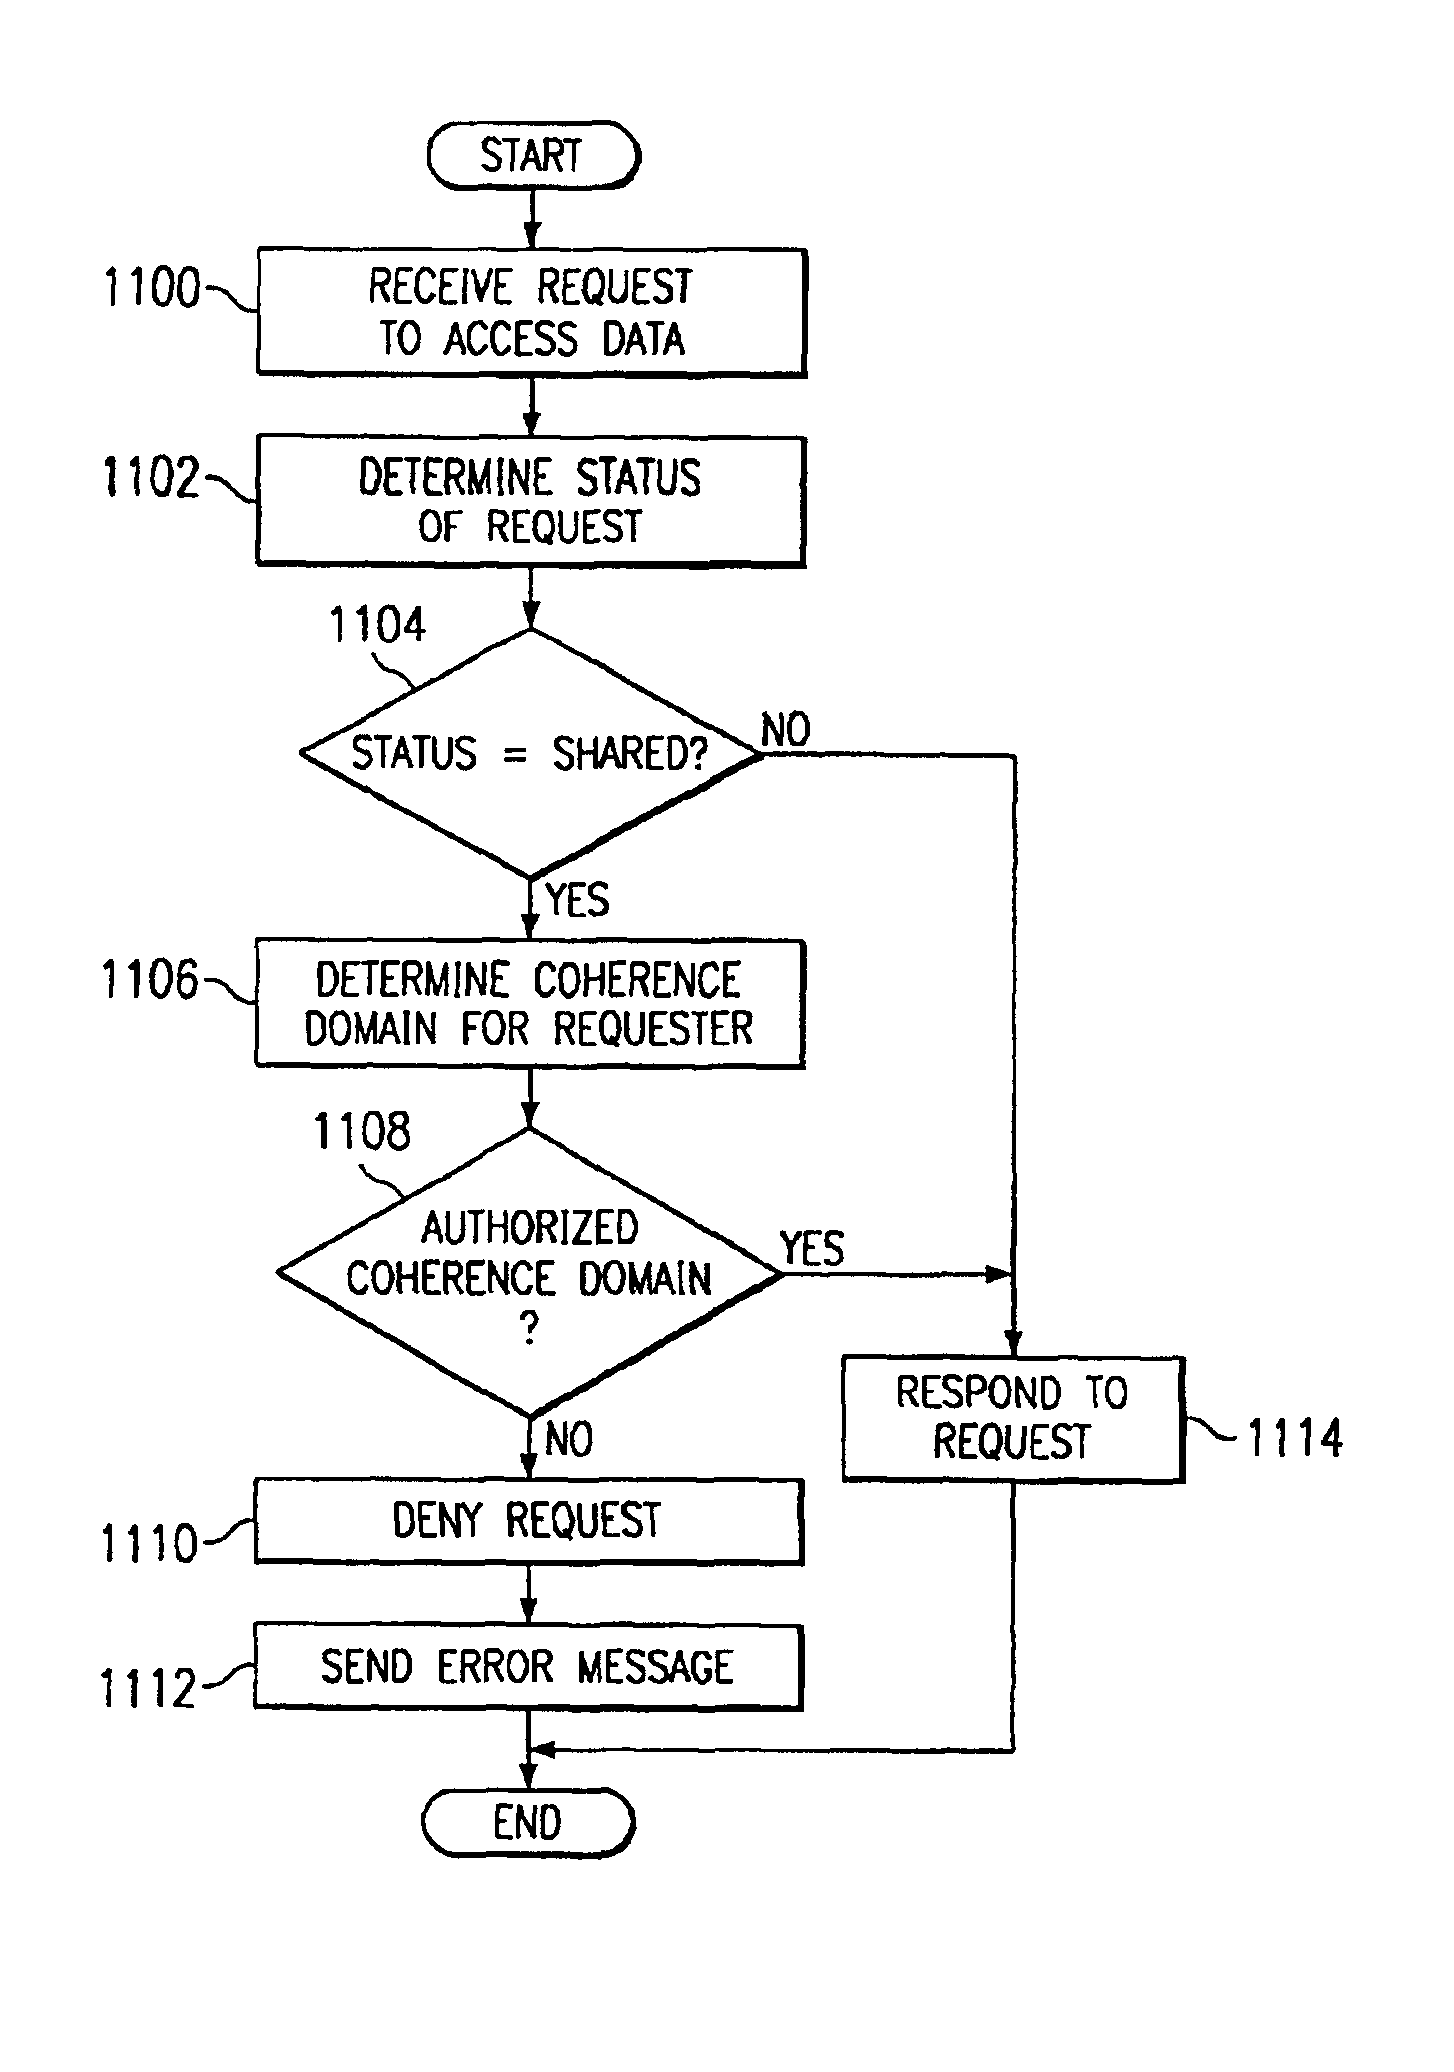 Providing shared and non-shared access to memory in a system with plural processor coherence domains